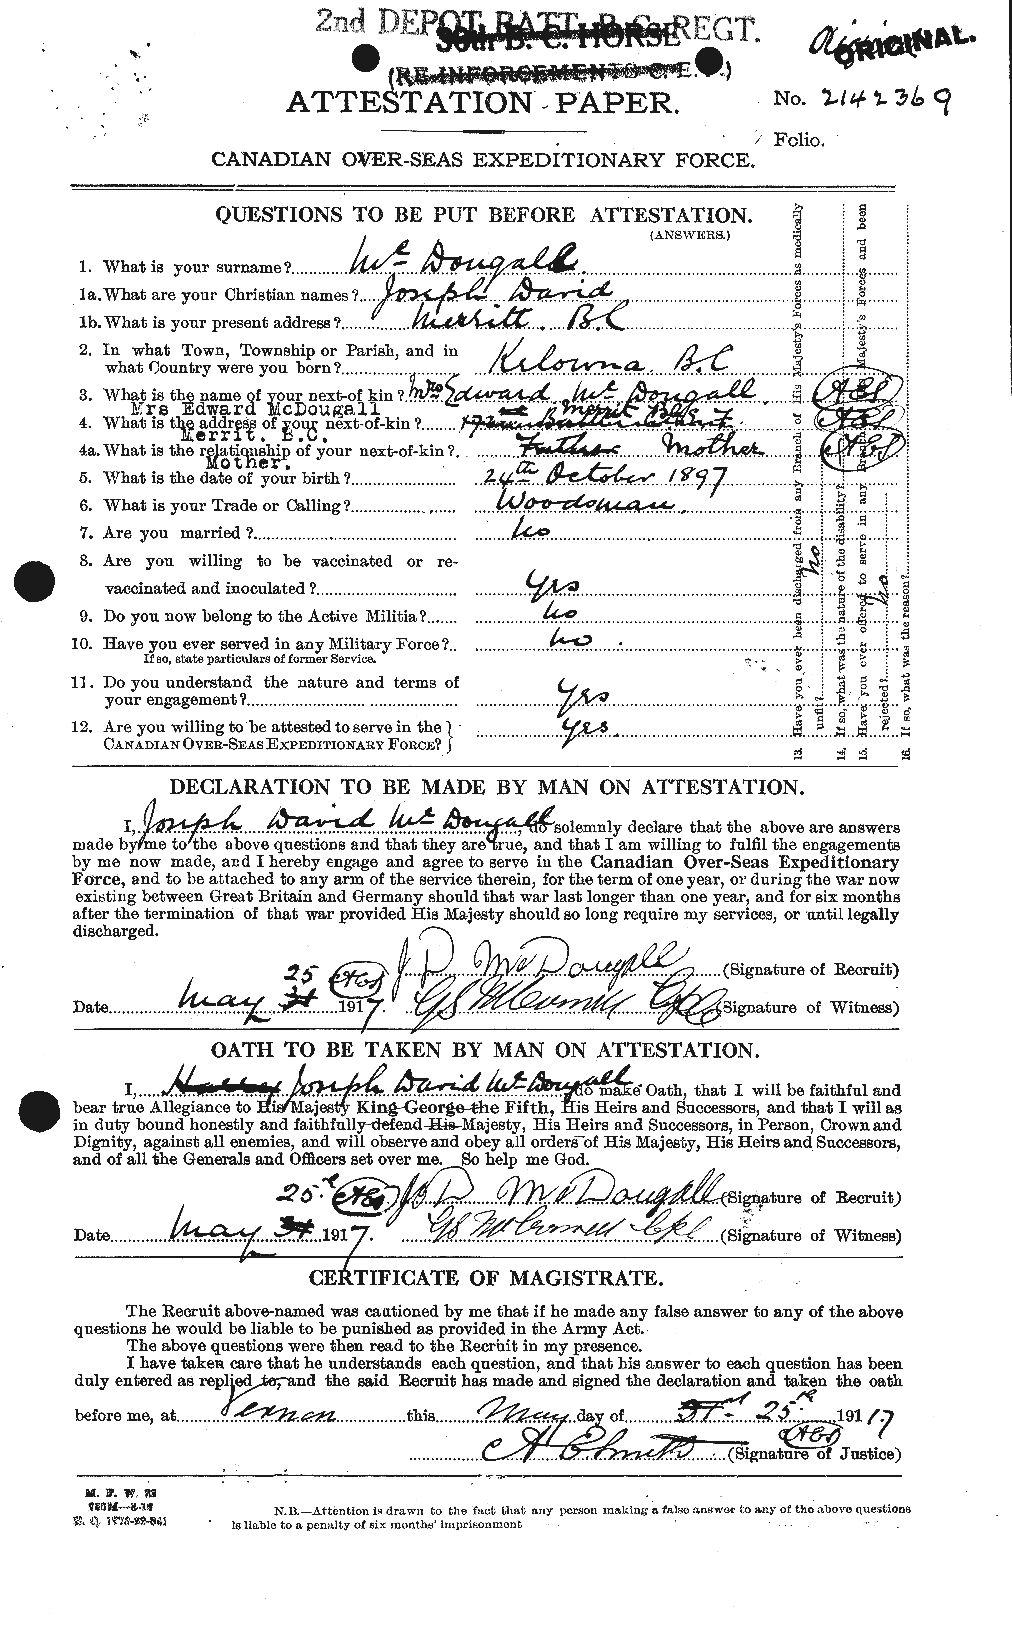 Personnel Records of the First World War - CEF 518299a